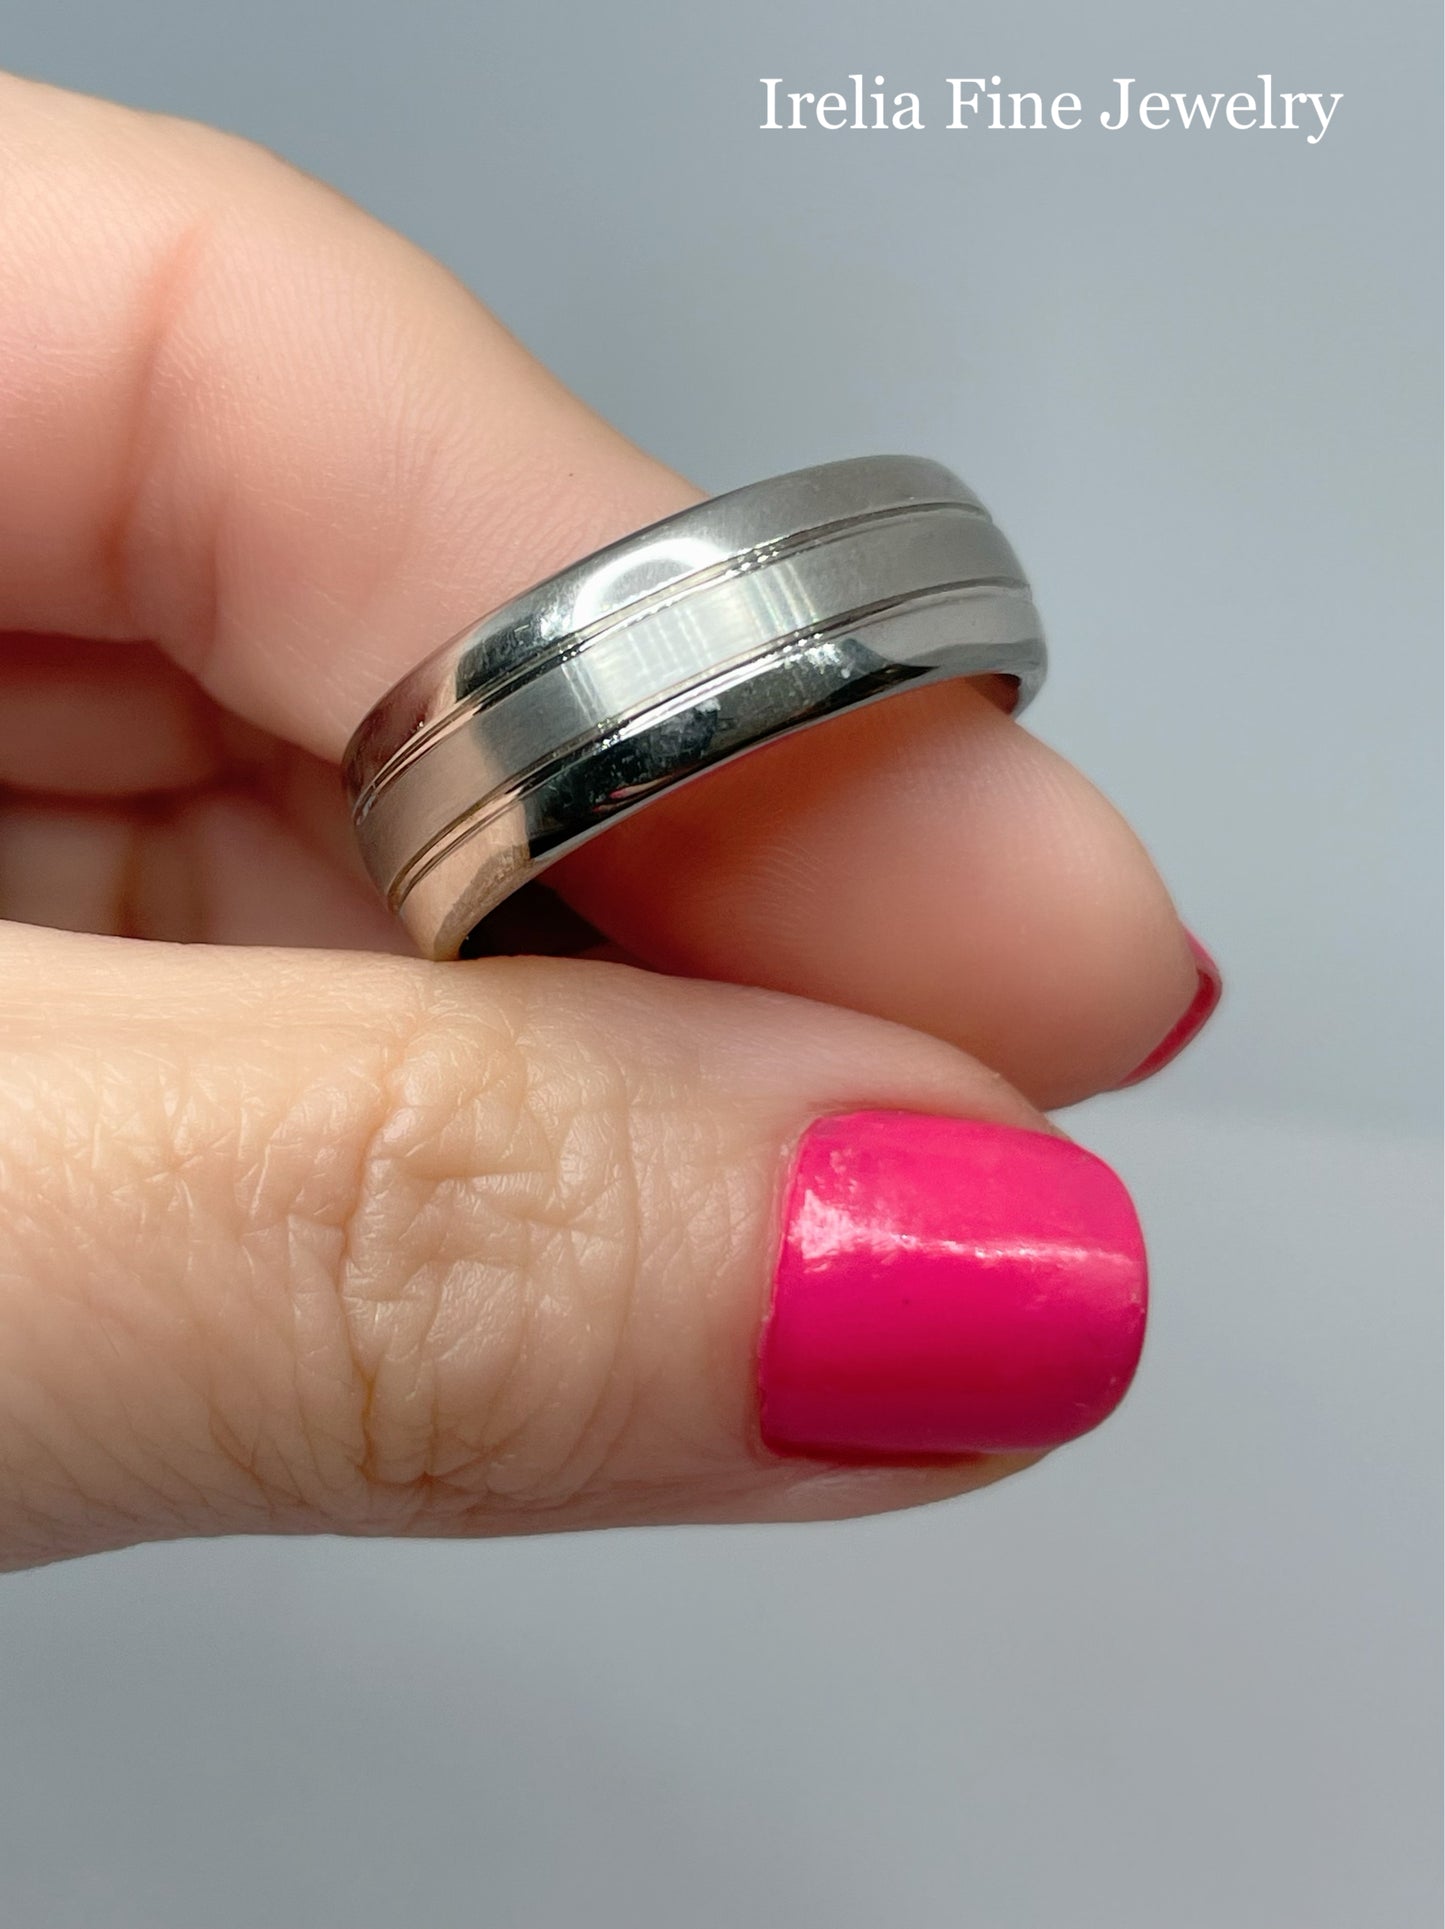 8MM Tungsten Carbide Ring - Bright Finish and Edge Size 10